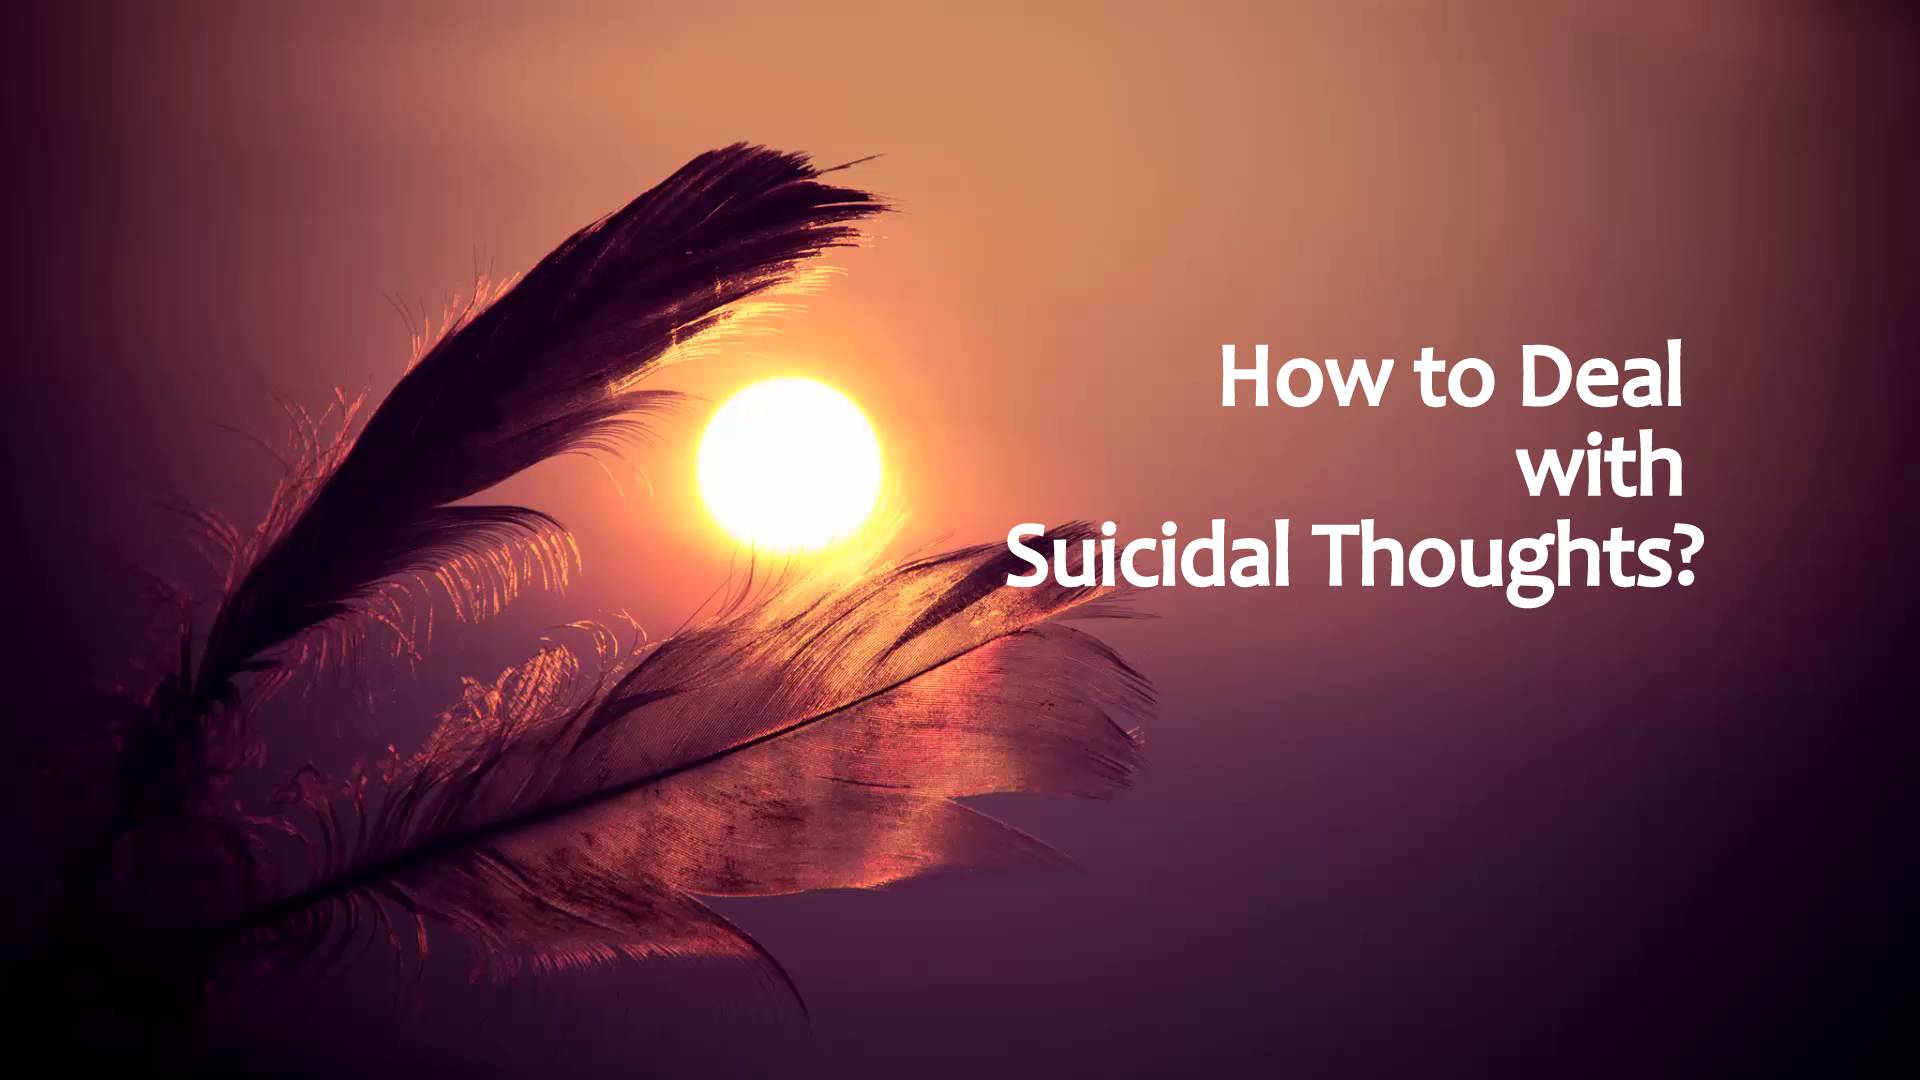 If you're feeling suicidal you've come to the right place - lifeinvedas.com